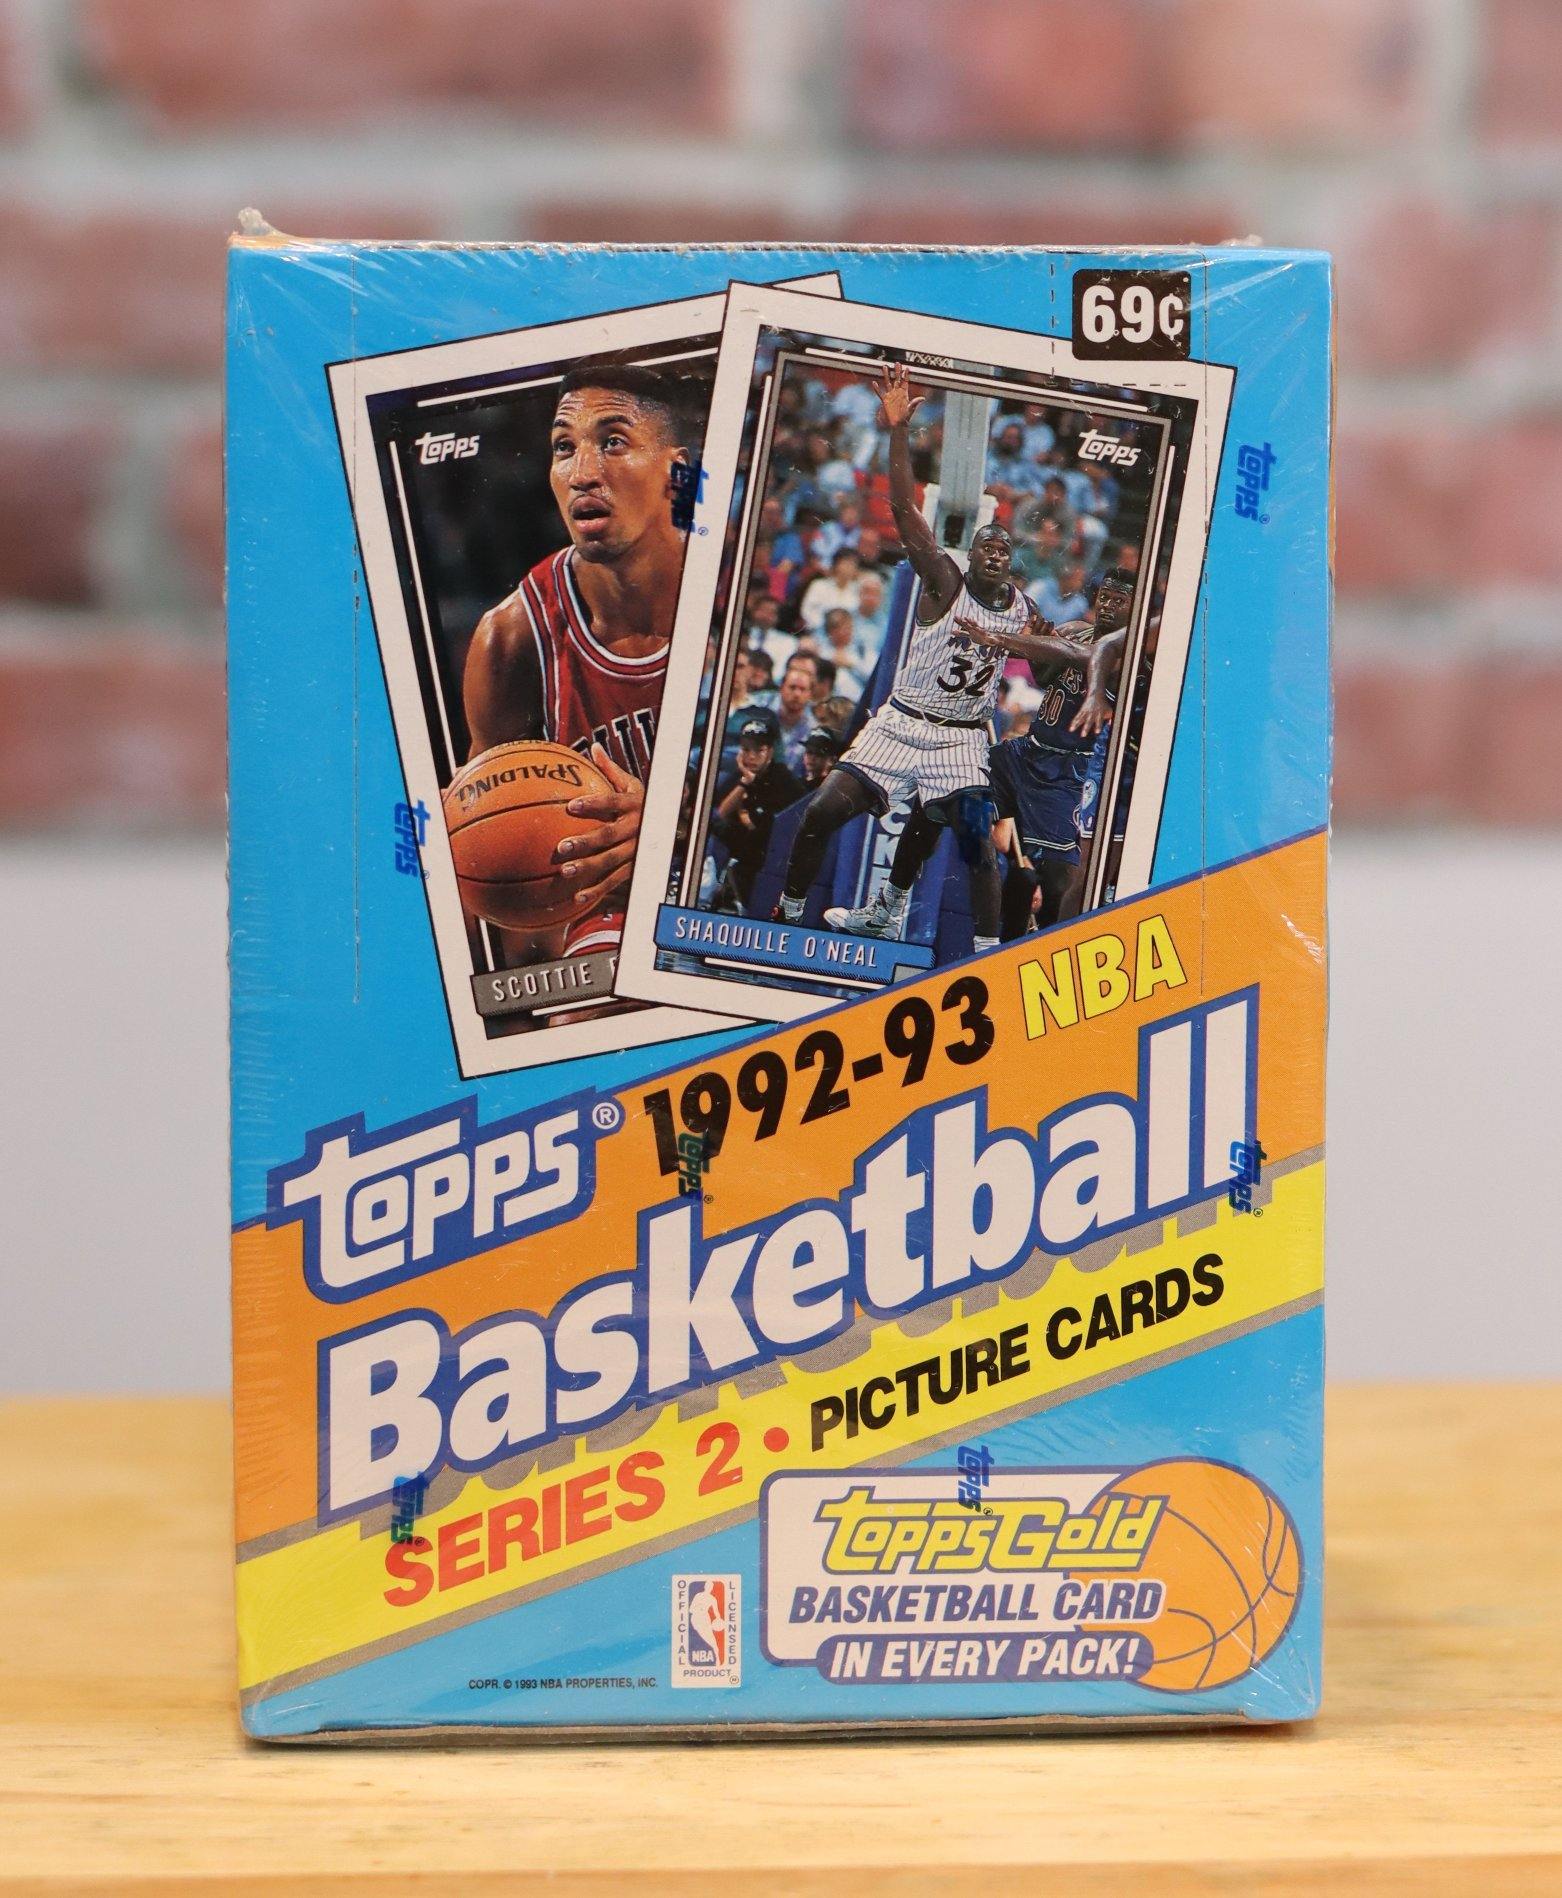 1992/93 Topps Basketball Card Series 2 Wax Box (36 Packs) Factory Sealed - FLIP Collectibles Shop